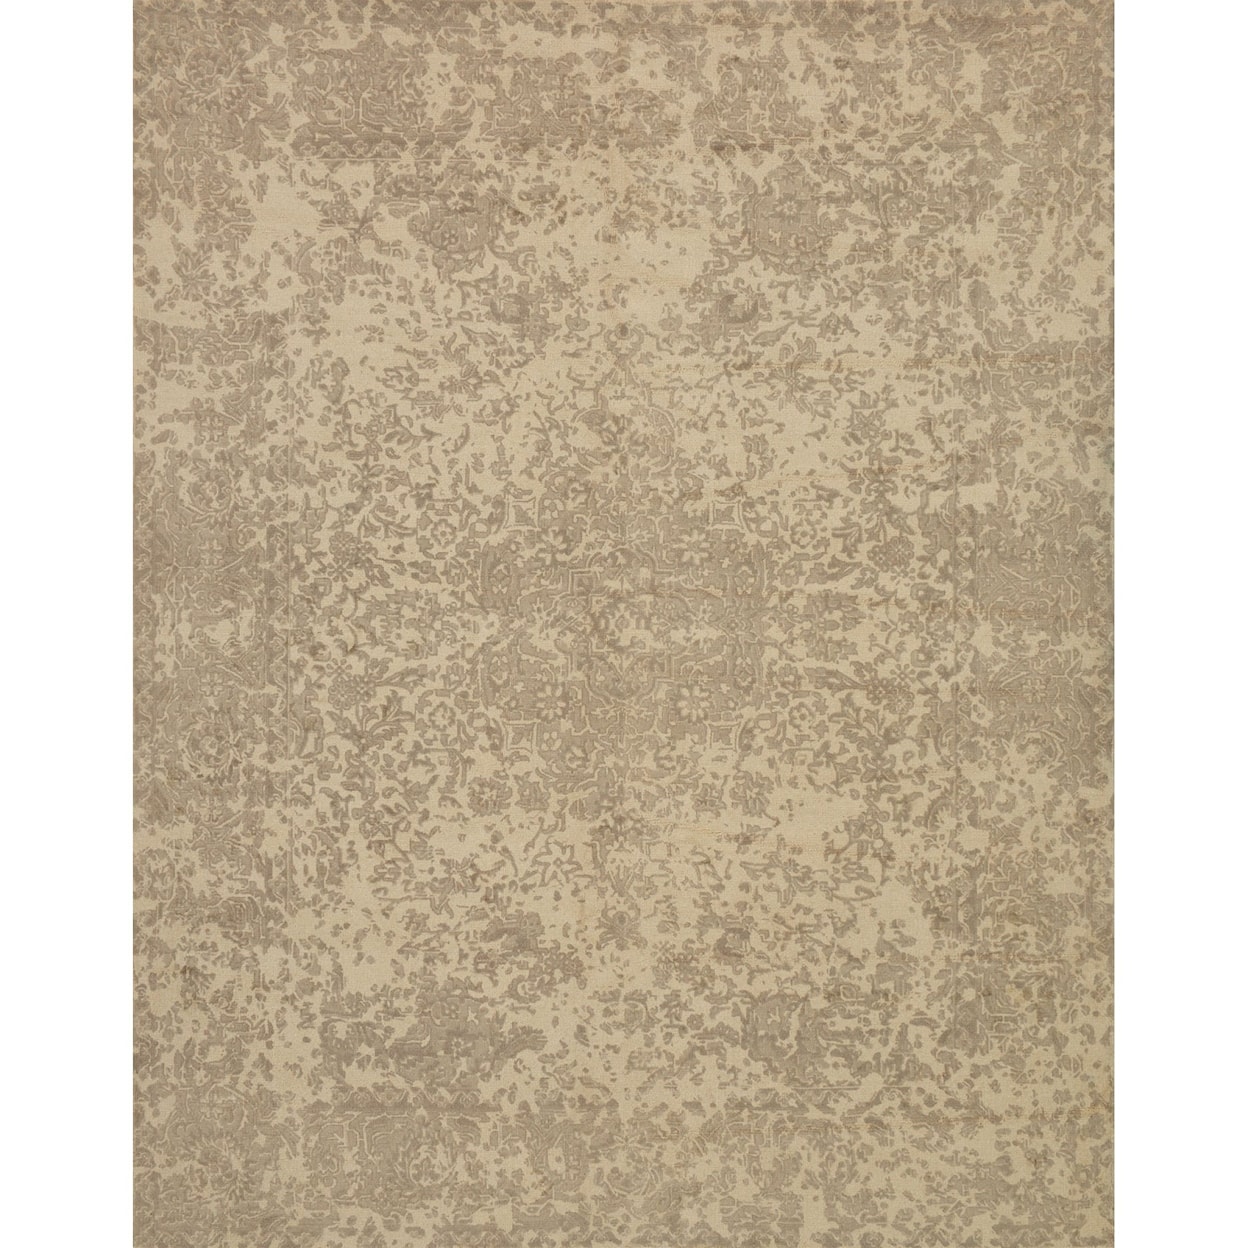 Magnolia Home by Joanna Gaines for Loloi Lily Park 2' 3" x 3' 9" Rectangle Rug